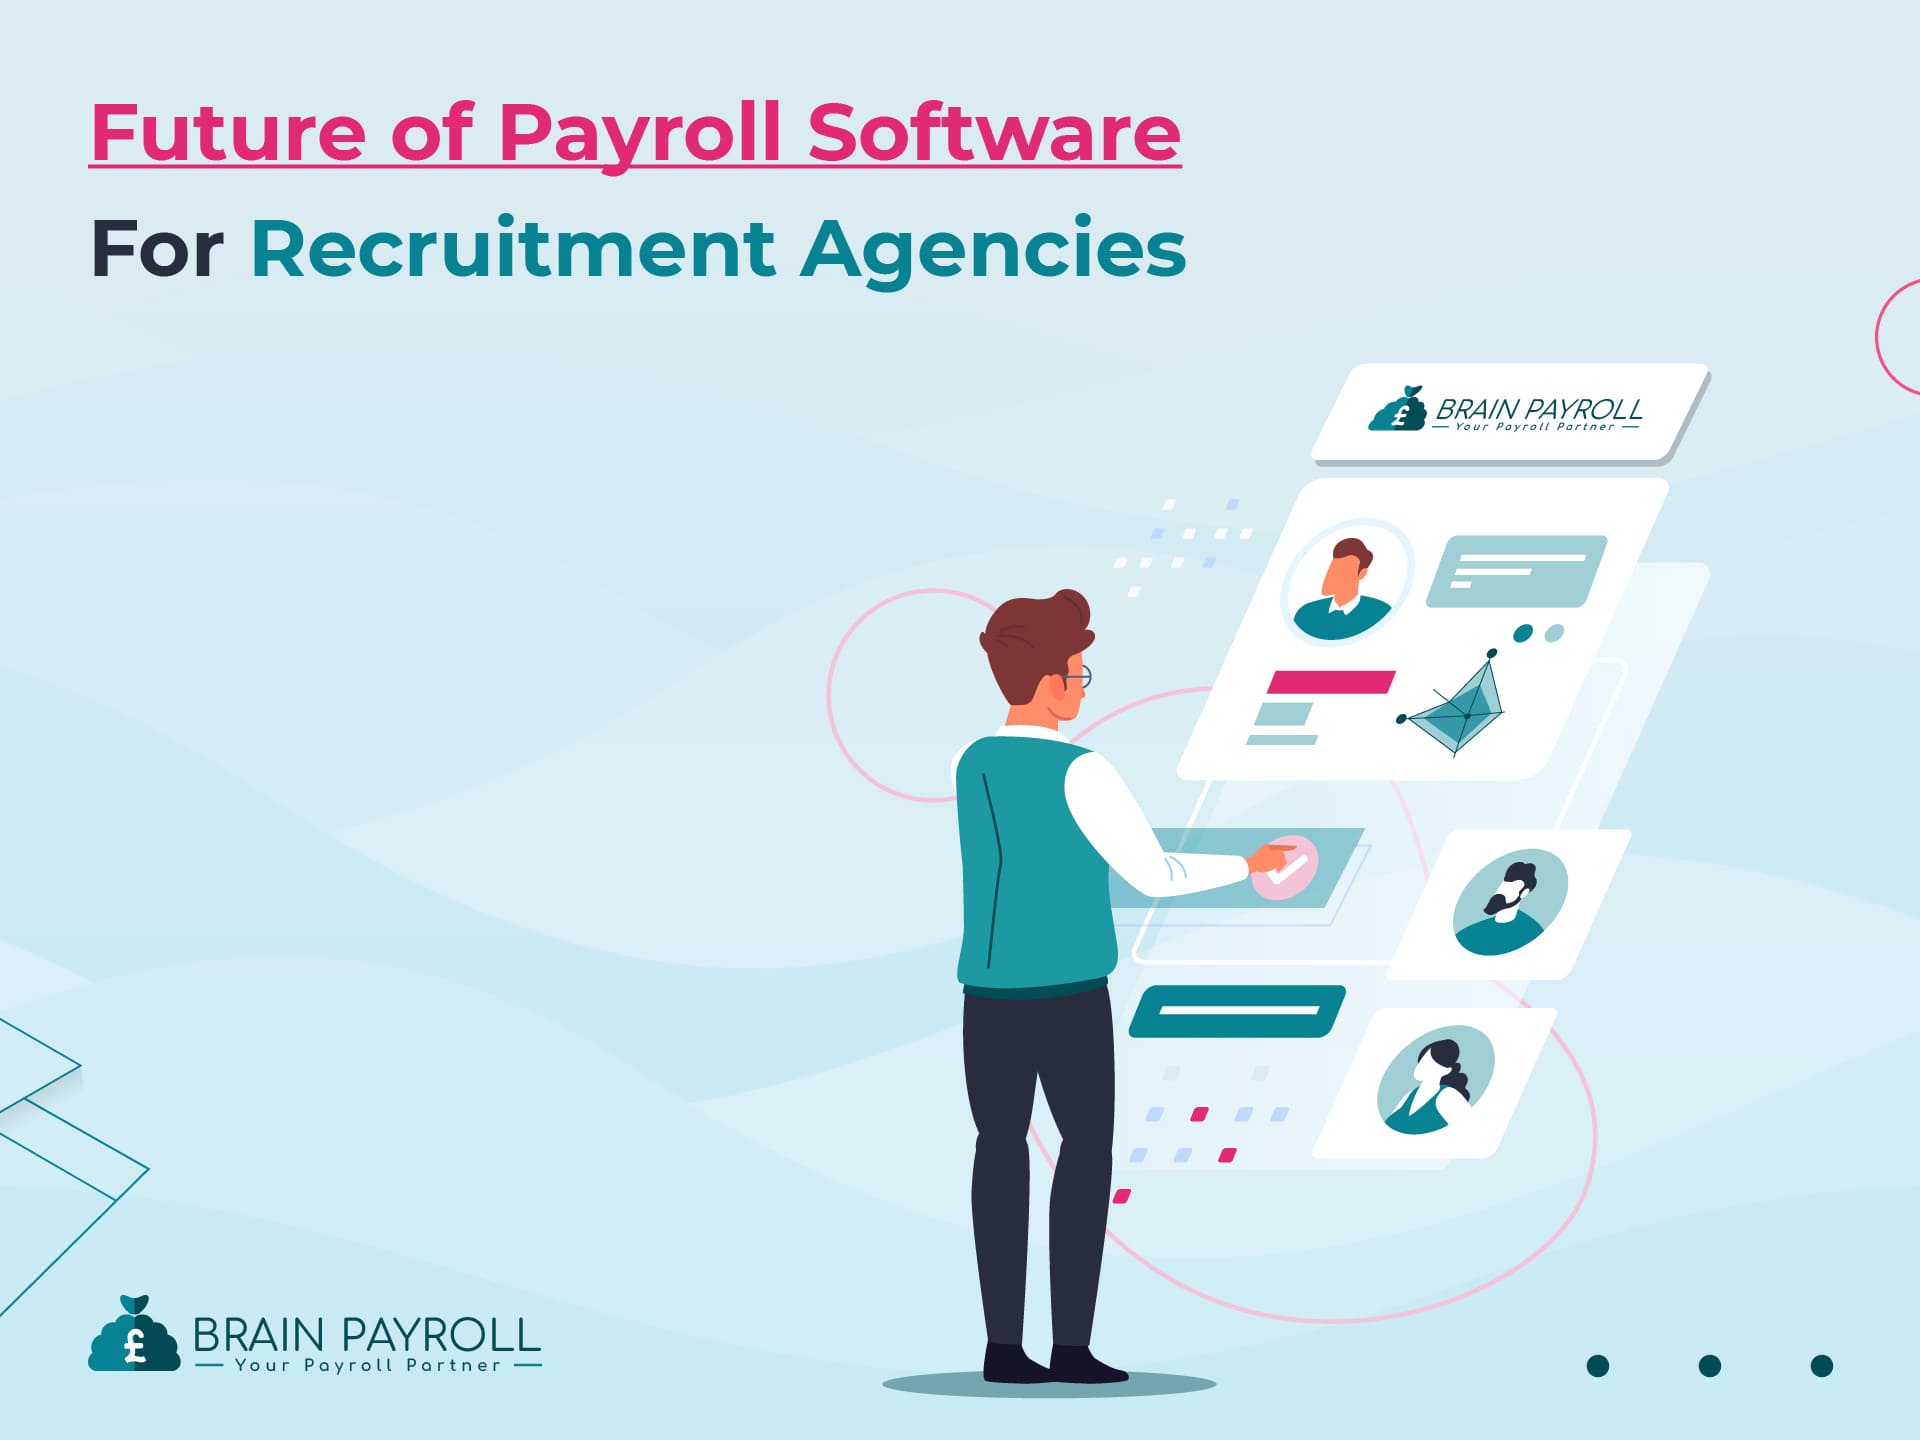 The Future of Payroll Software for Recruitment Agencies